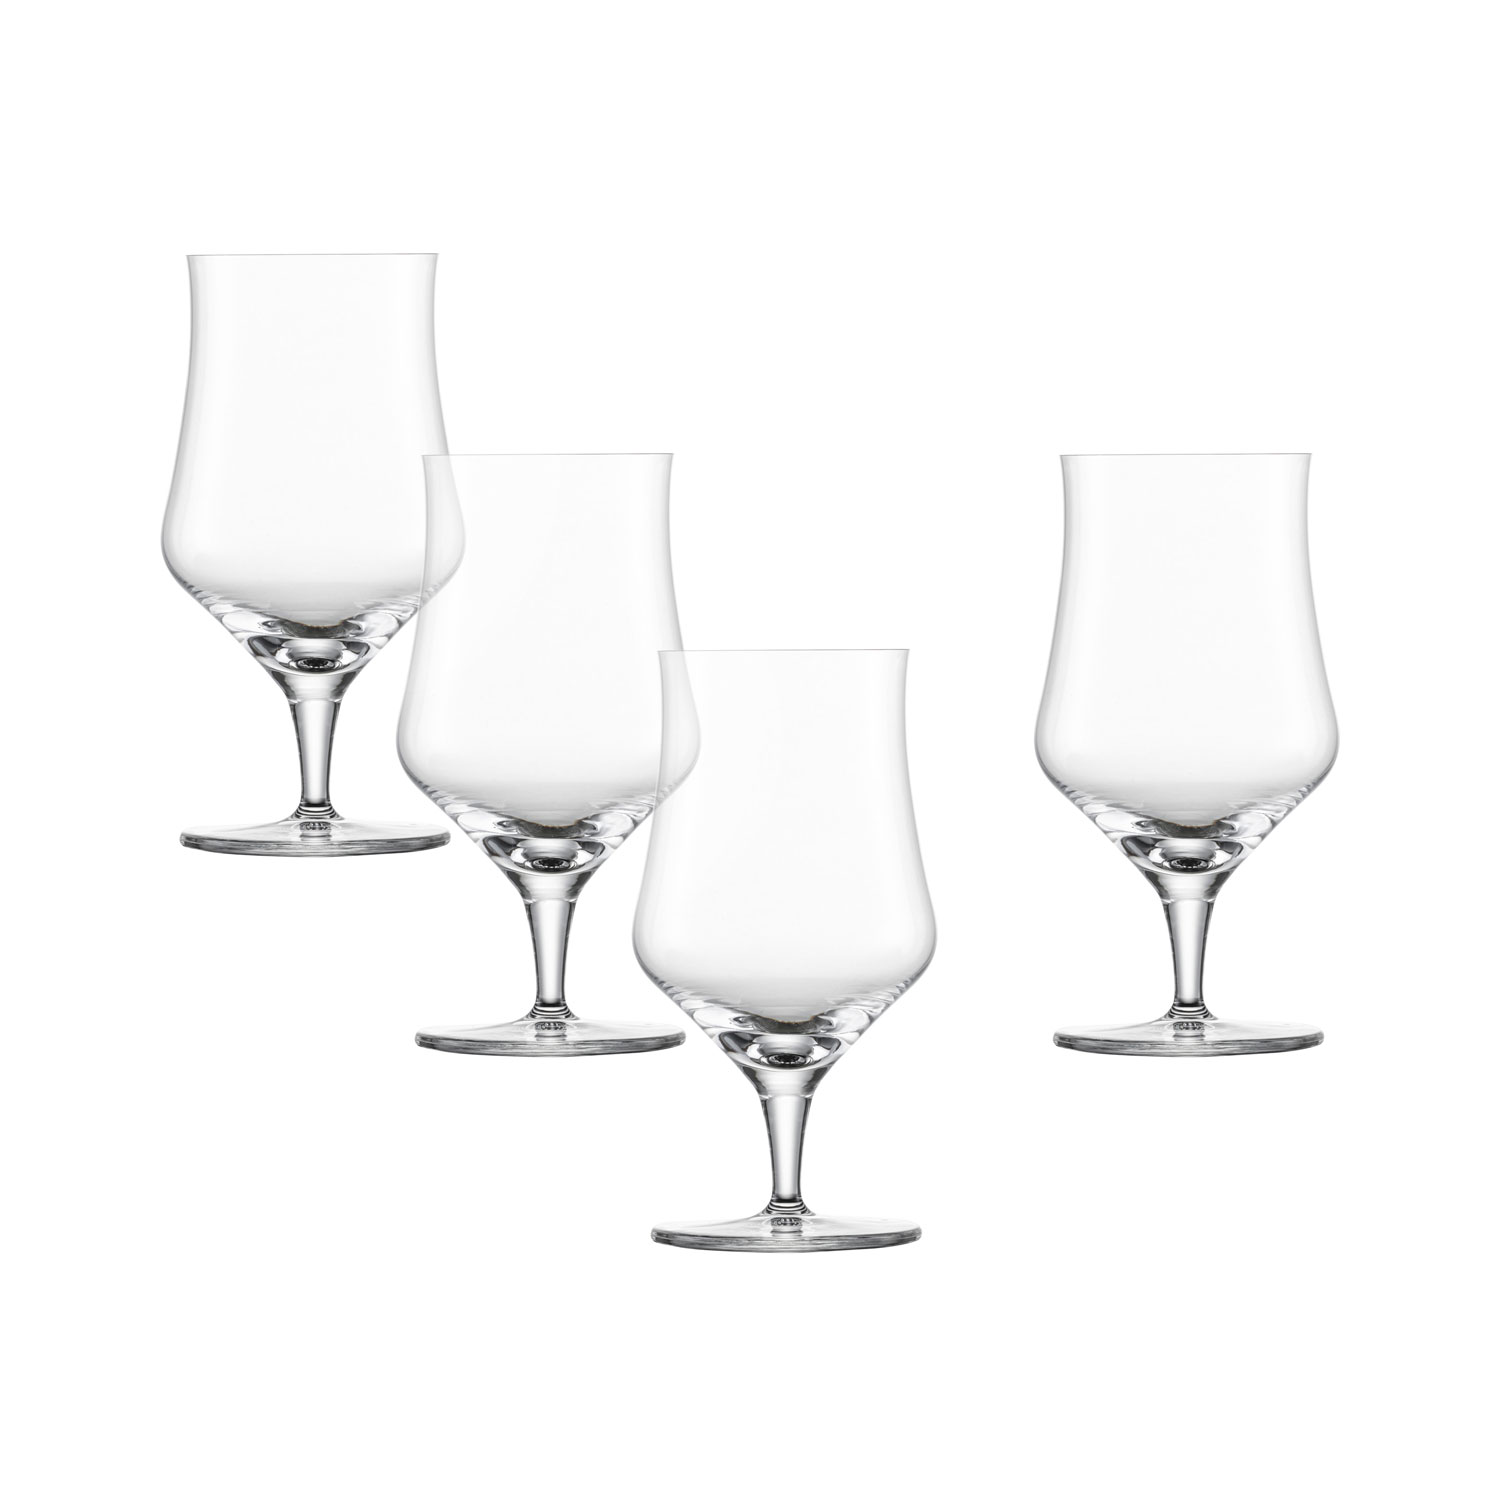 ZWIESEL GLAS Classico Lager Beer Glasses - Set of 6